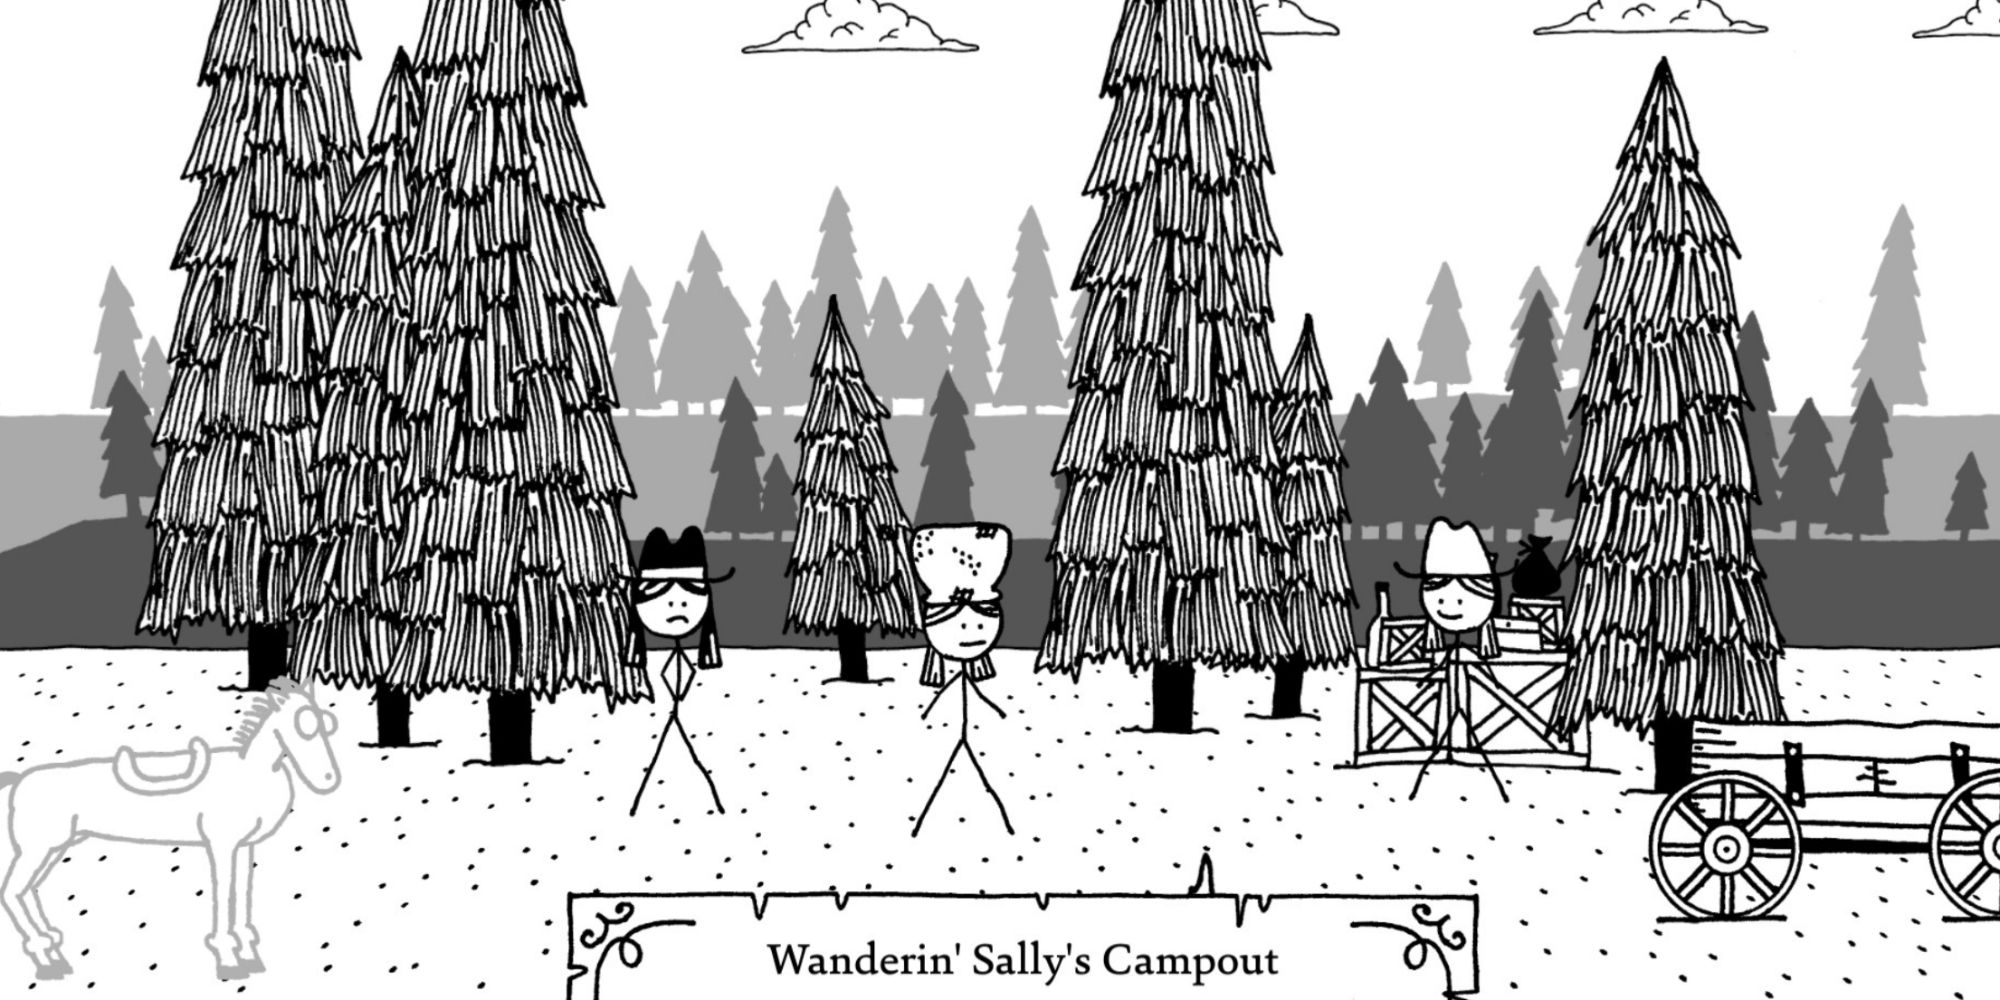 Wandering Sally's Campout West of Loathing